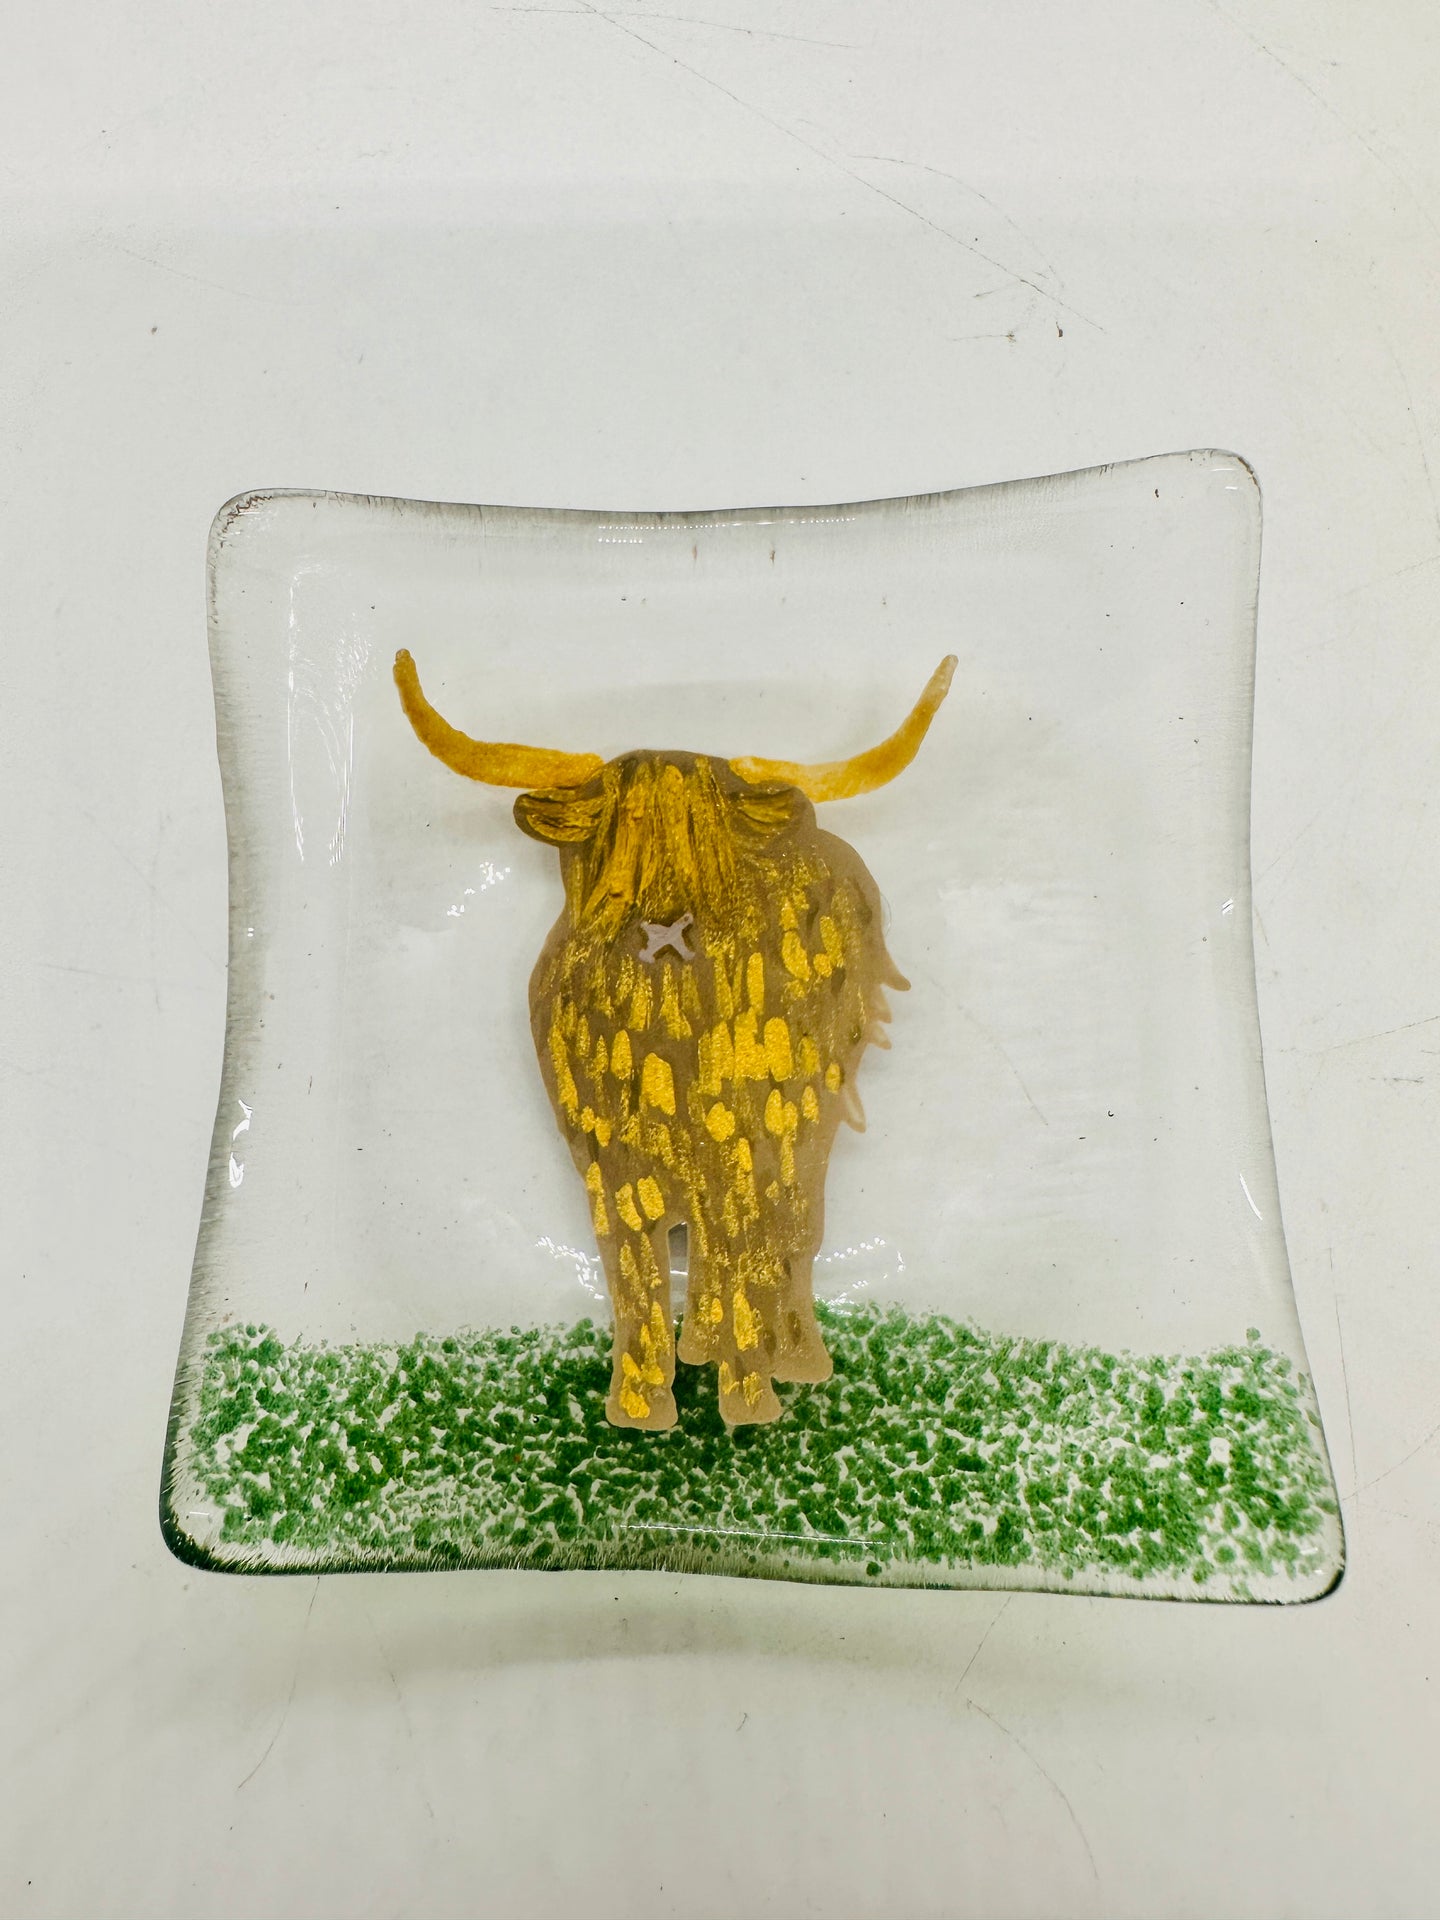 handmade fused glass deep dish / trinket tray with highland cow detail